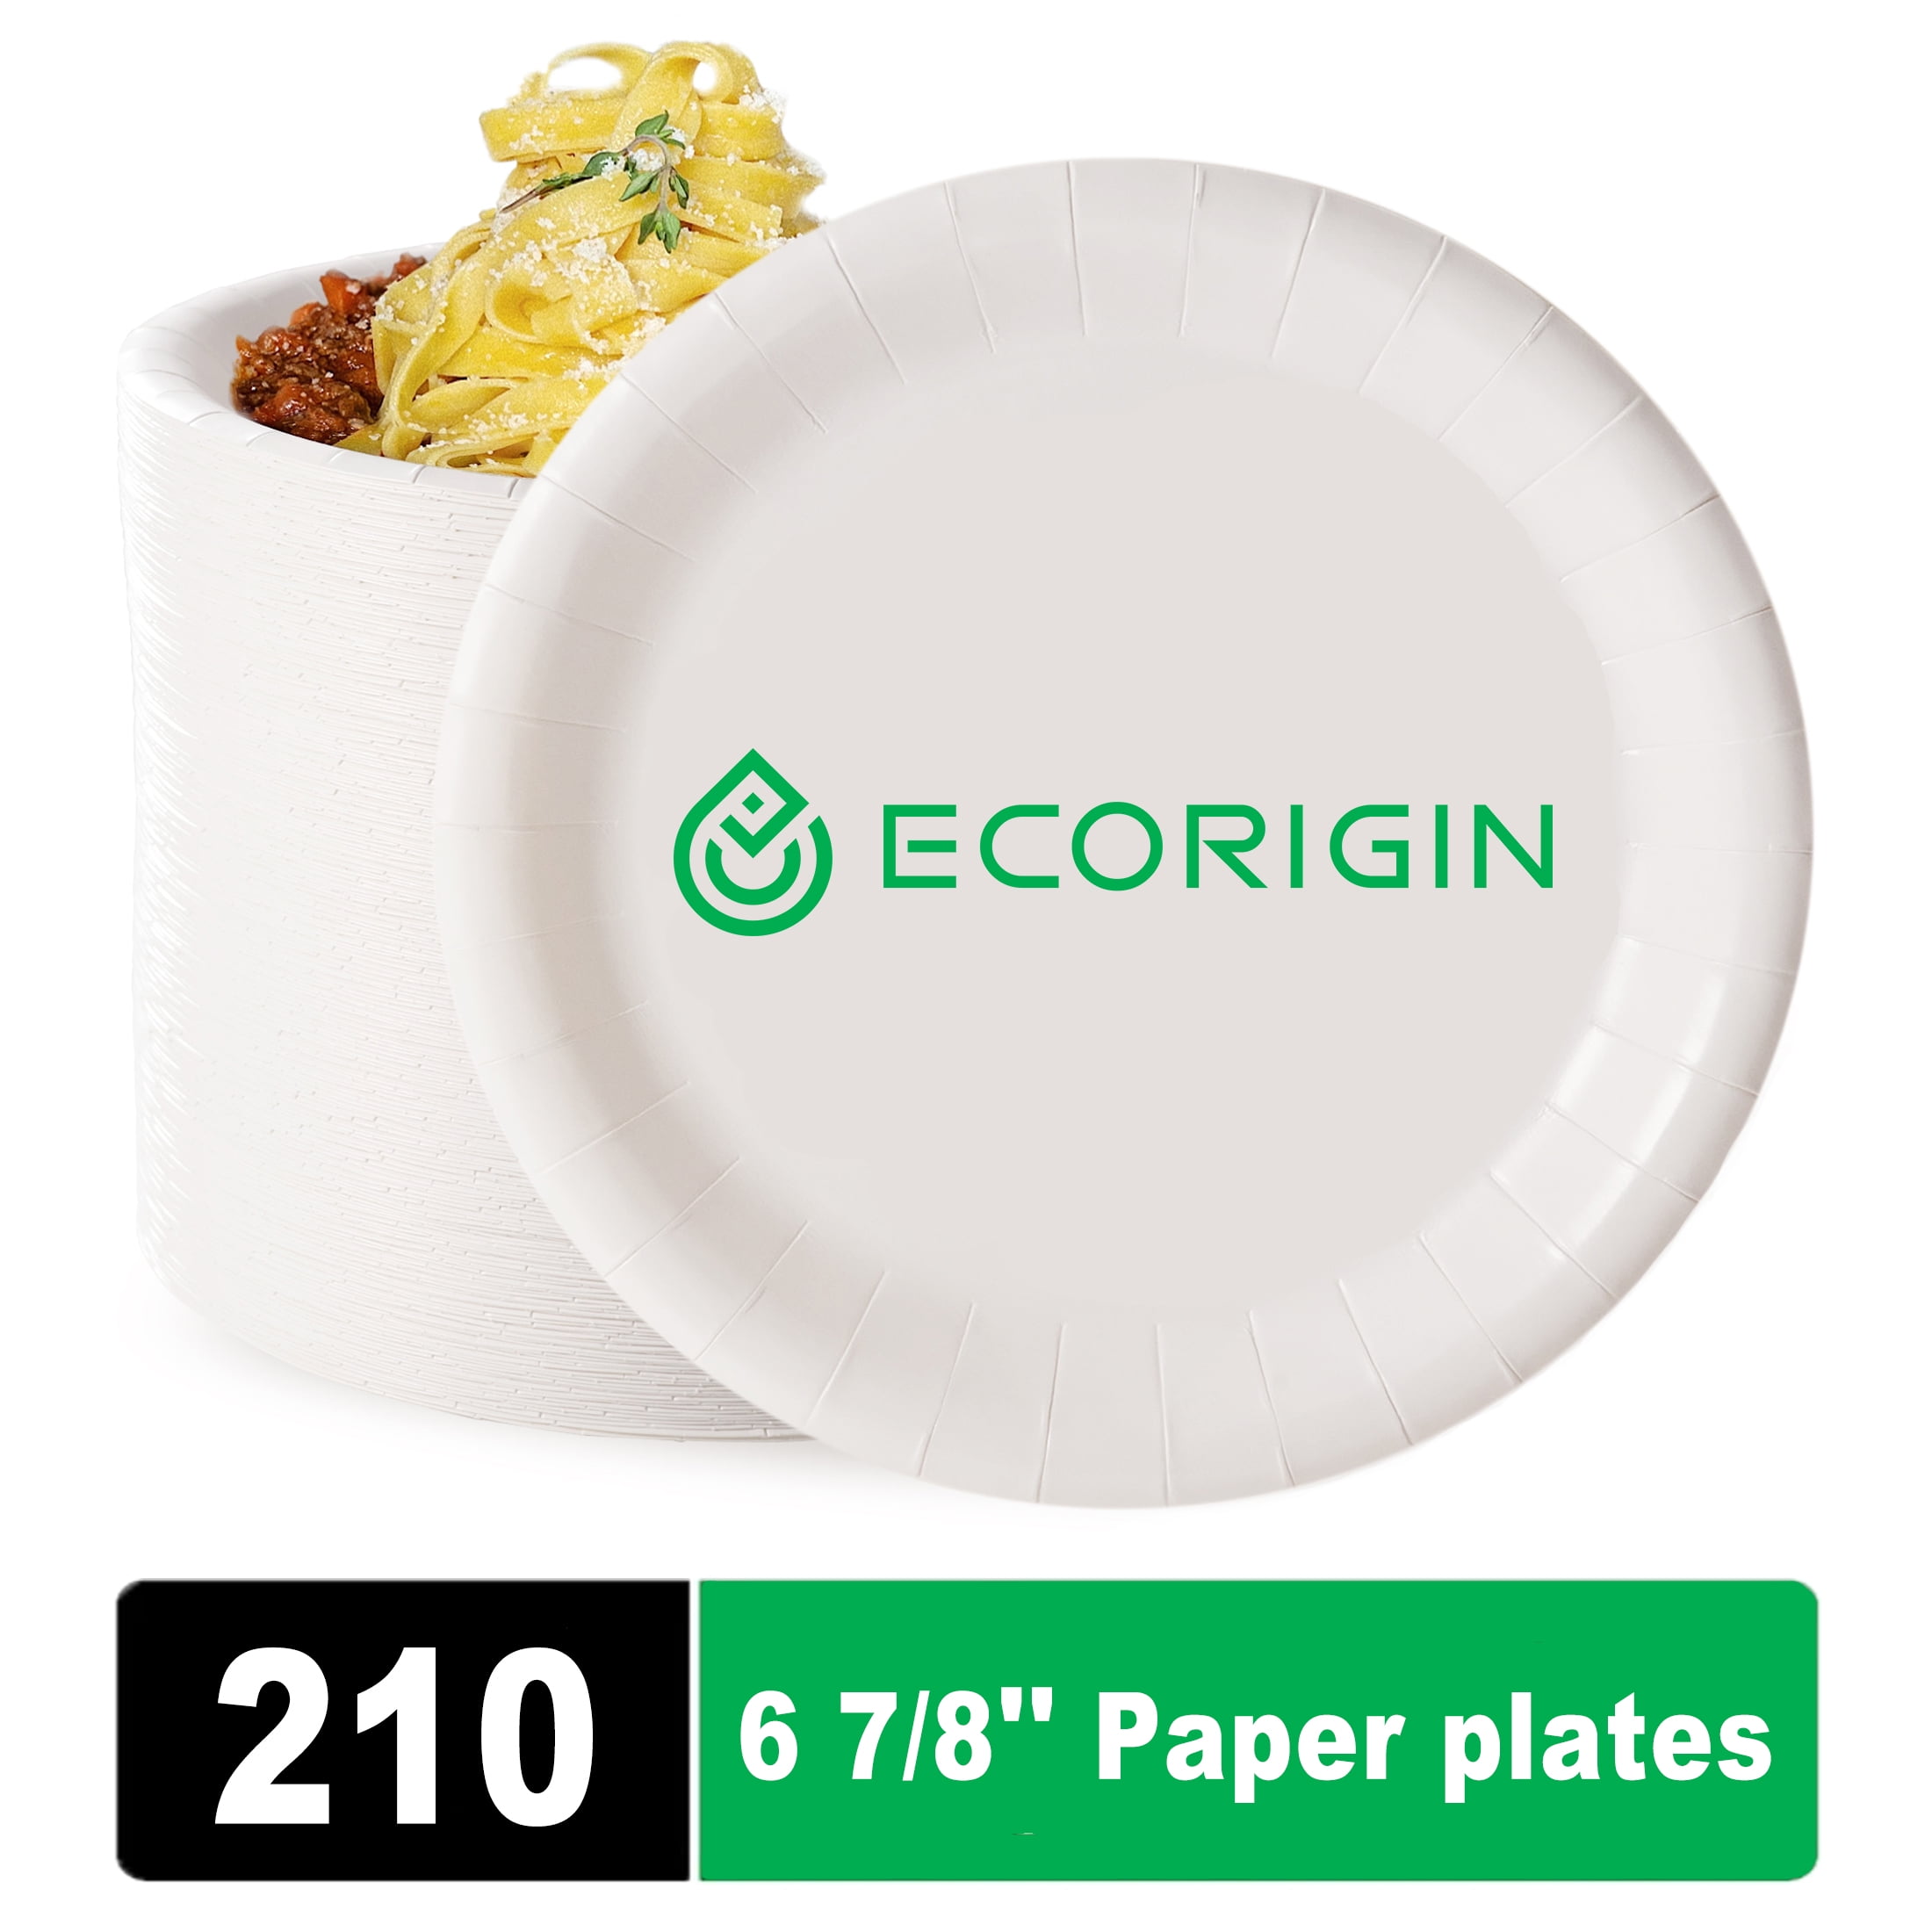 ECORIGIN 10 inch Paper Plates, Dinner Size Coated Plates, Everyday Use Plates, Household Disposable Plates, White Round Plates Bulk, 210 Count